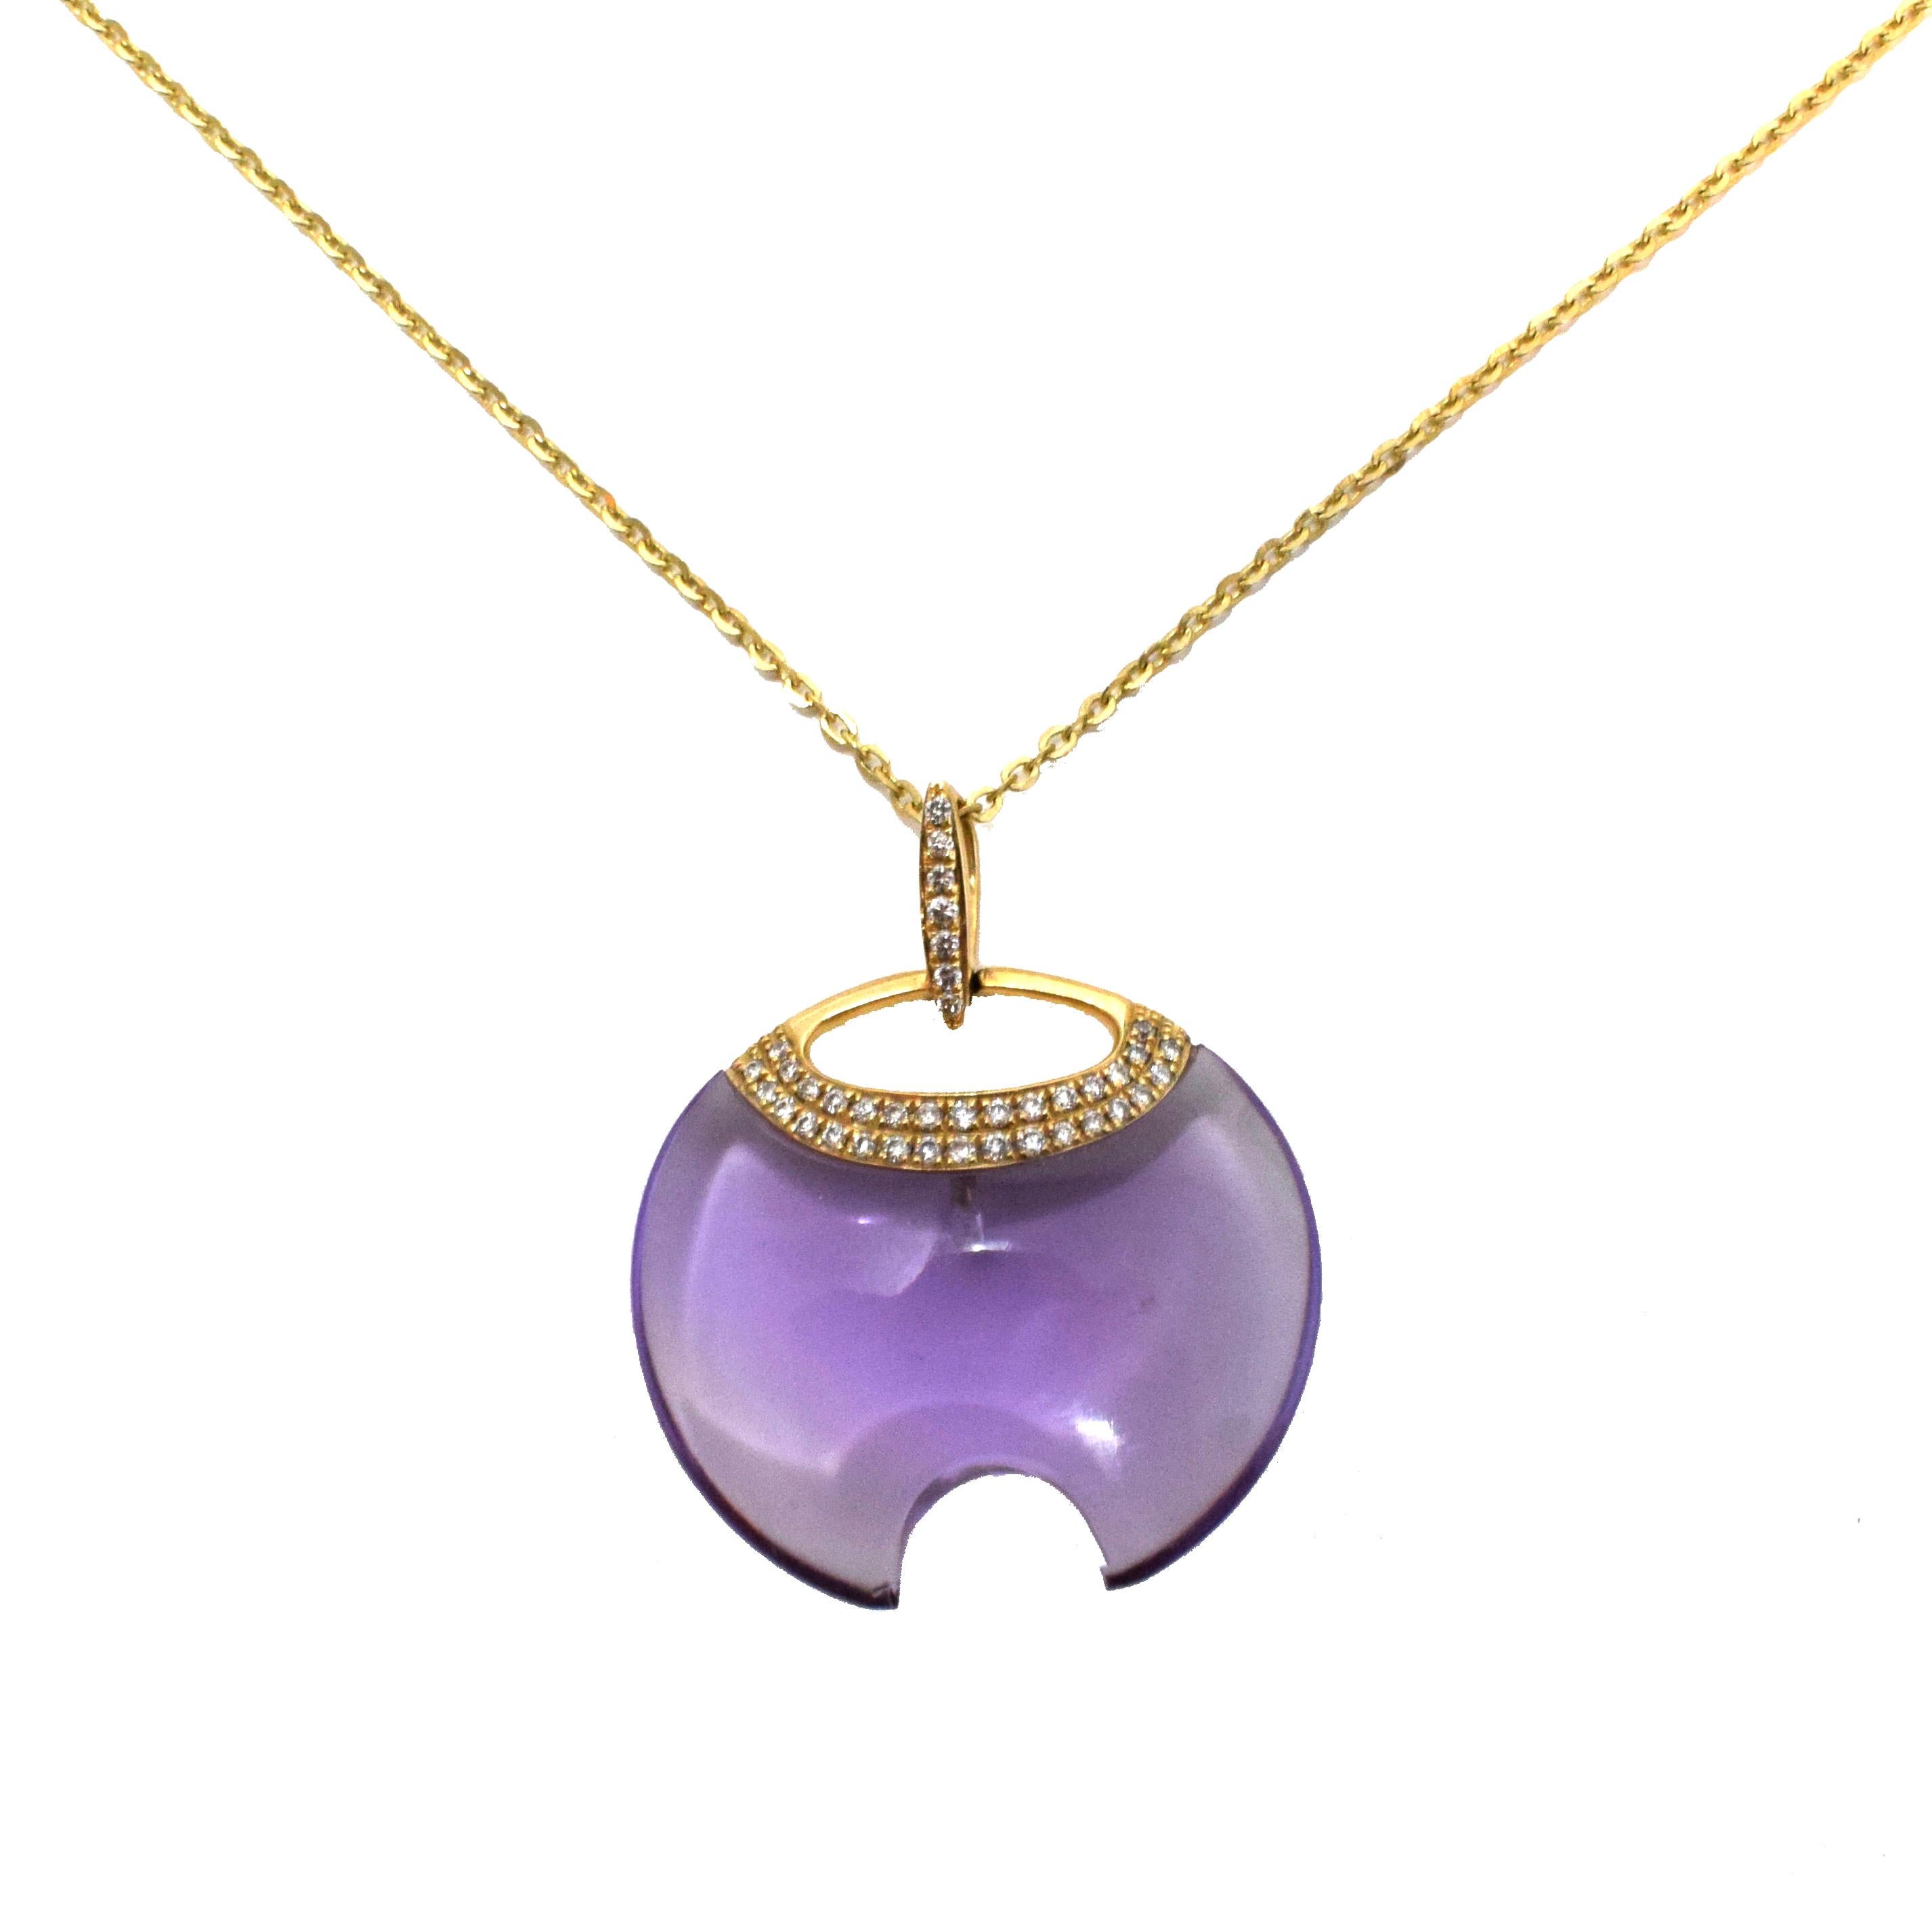 Brilliance Jewels, Miami
Questions? Call Us Anytime!
786,482,8100

Style: Pendant Necklace

Metal: Yellow Gold

Metal Purity: 14k

Stones: Amethyst

                  Round Diamonds

Total Item Weight (grams): 5.6

Necklace Length: 17